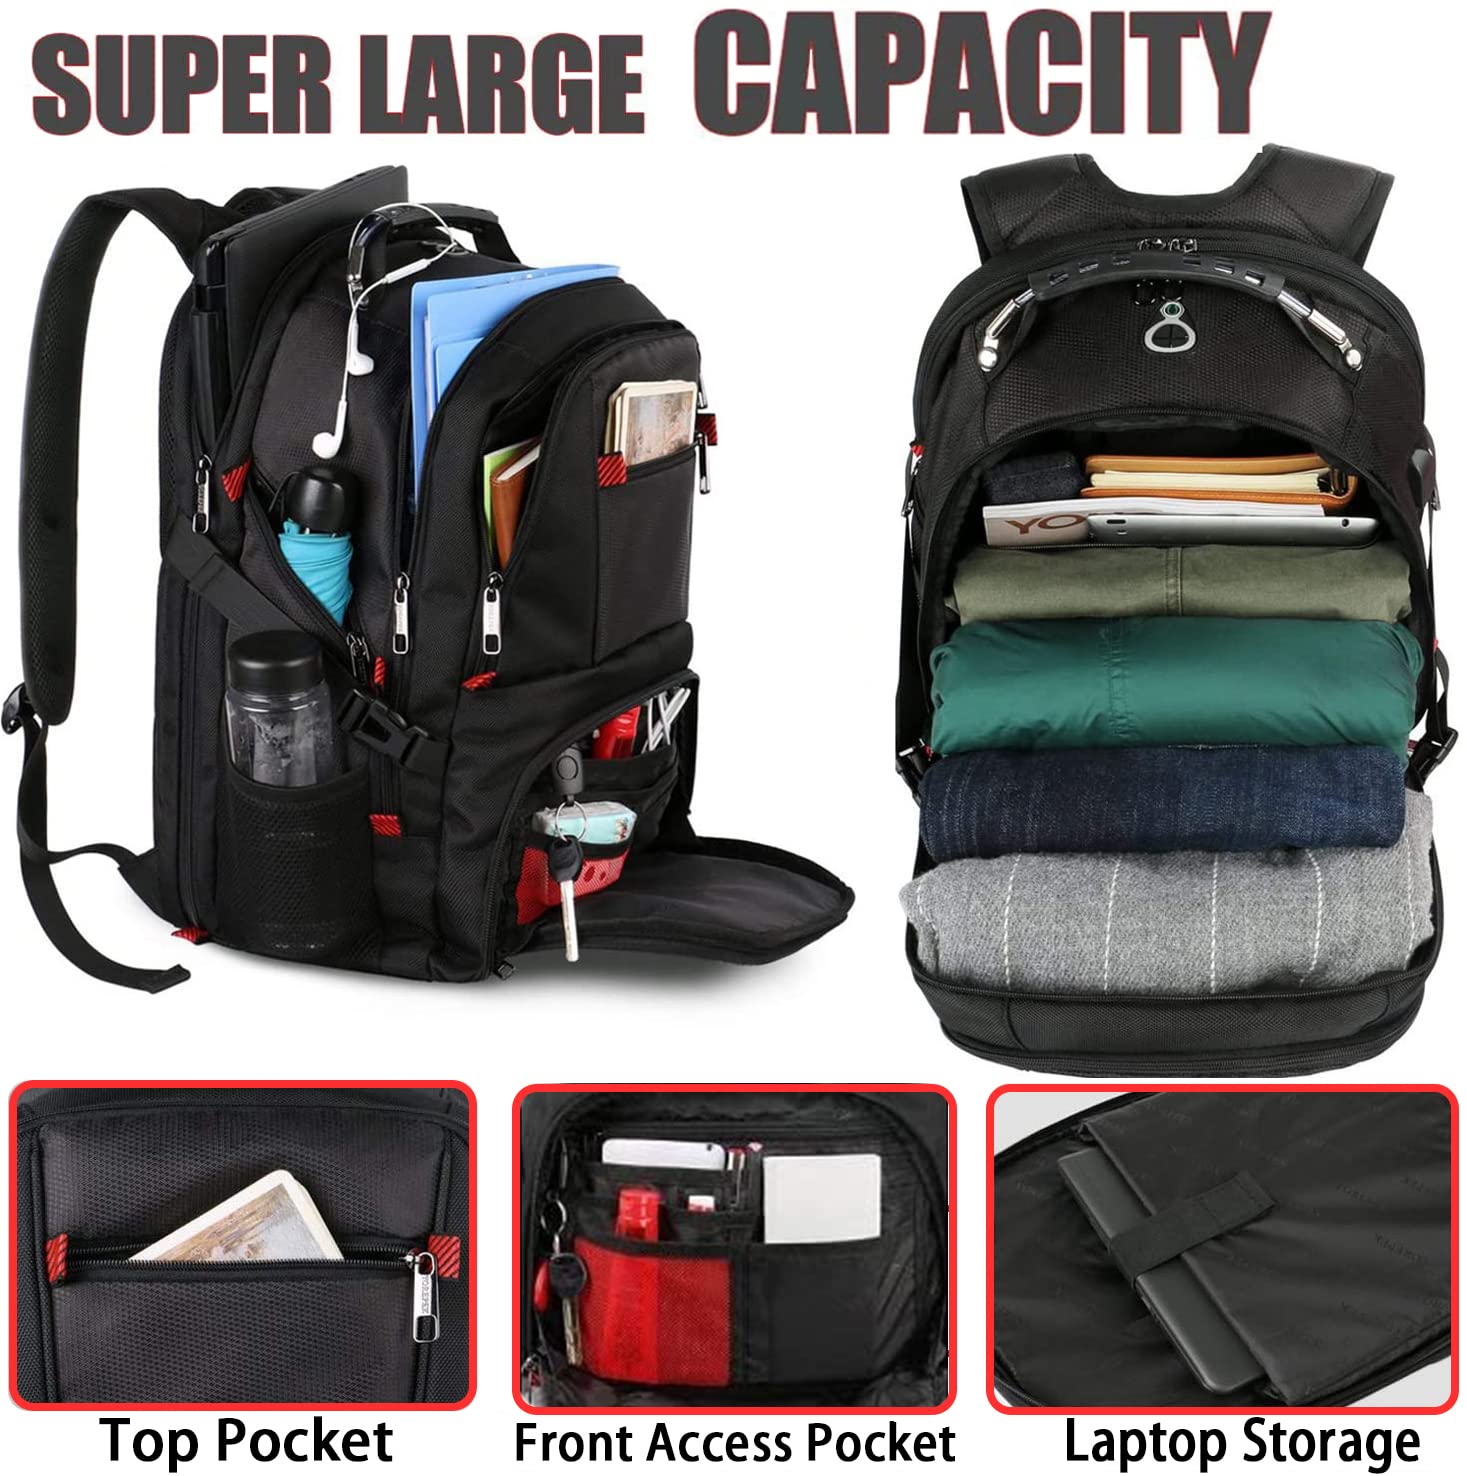 YOREPEK Travel Backpac & Bowling Ball Bag, Extra Large 50L Laptop Backpacks for Men Women, Padded Divider & Ball Cup Holder for 2 Ball Airline Approved Business Work Bag